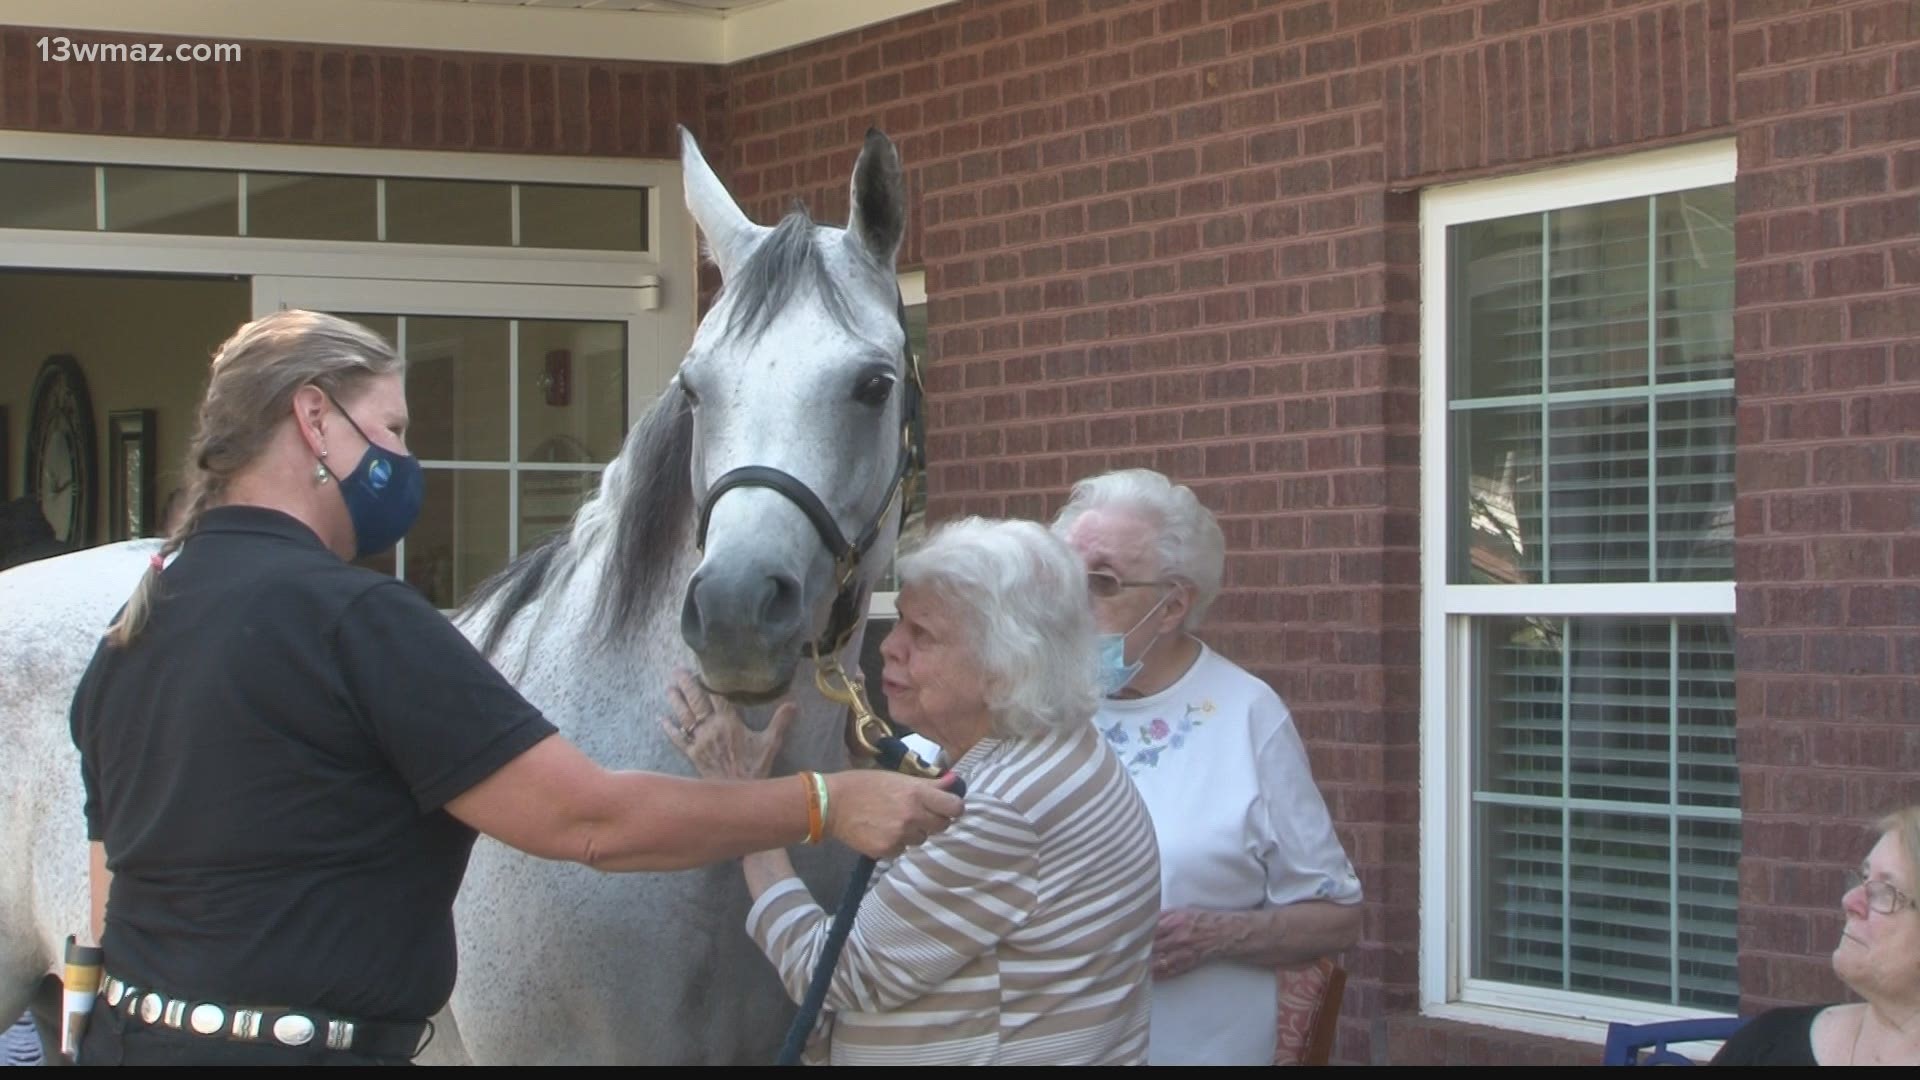 Residents at Summer's Landing in Warner Robins spent their day with Lily, a therapy horse